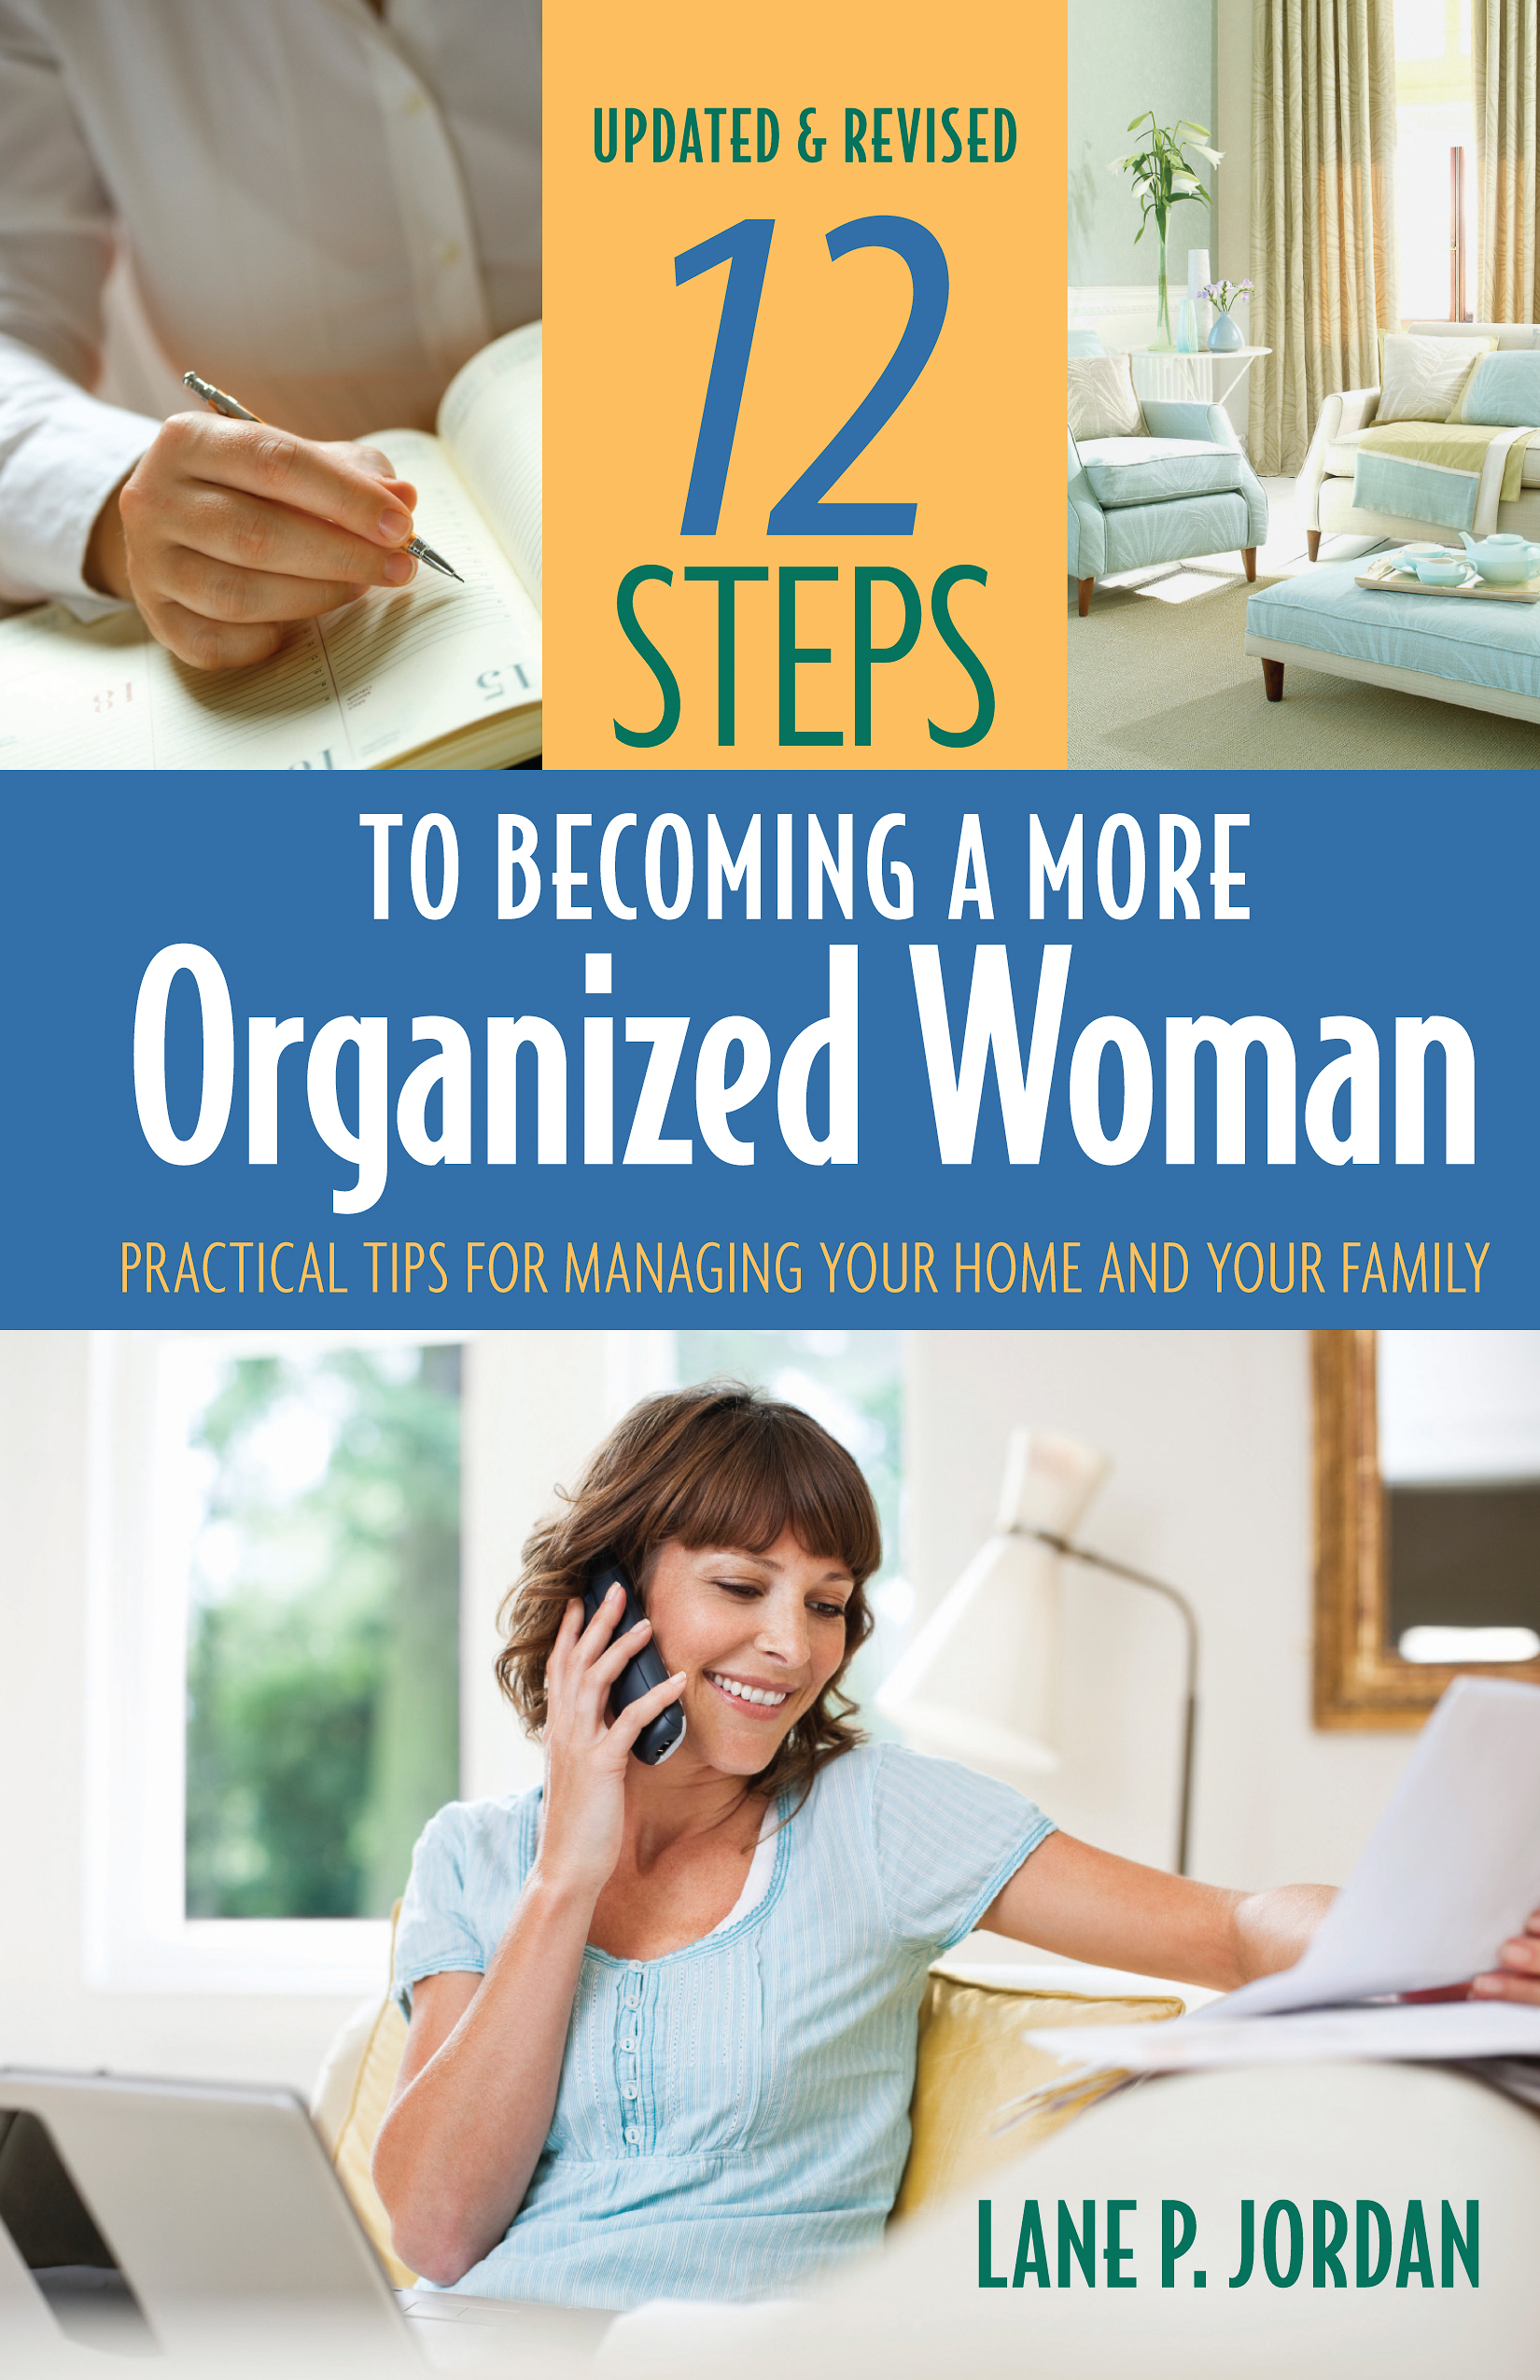 12 Tips to Becoming a More Organized Woman